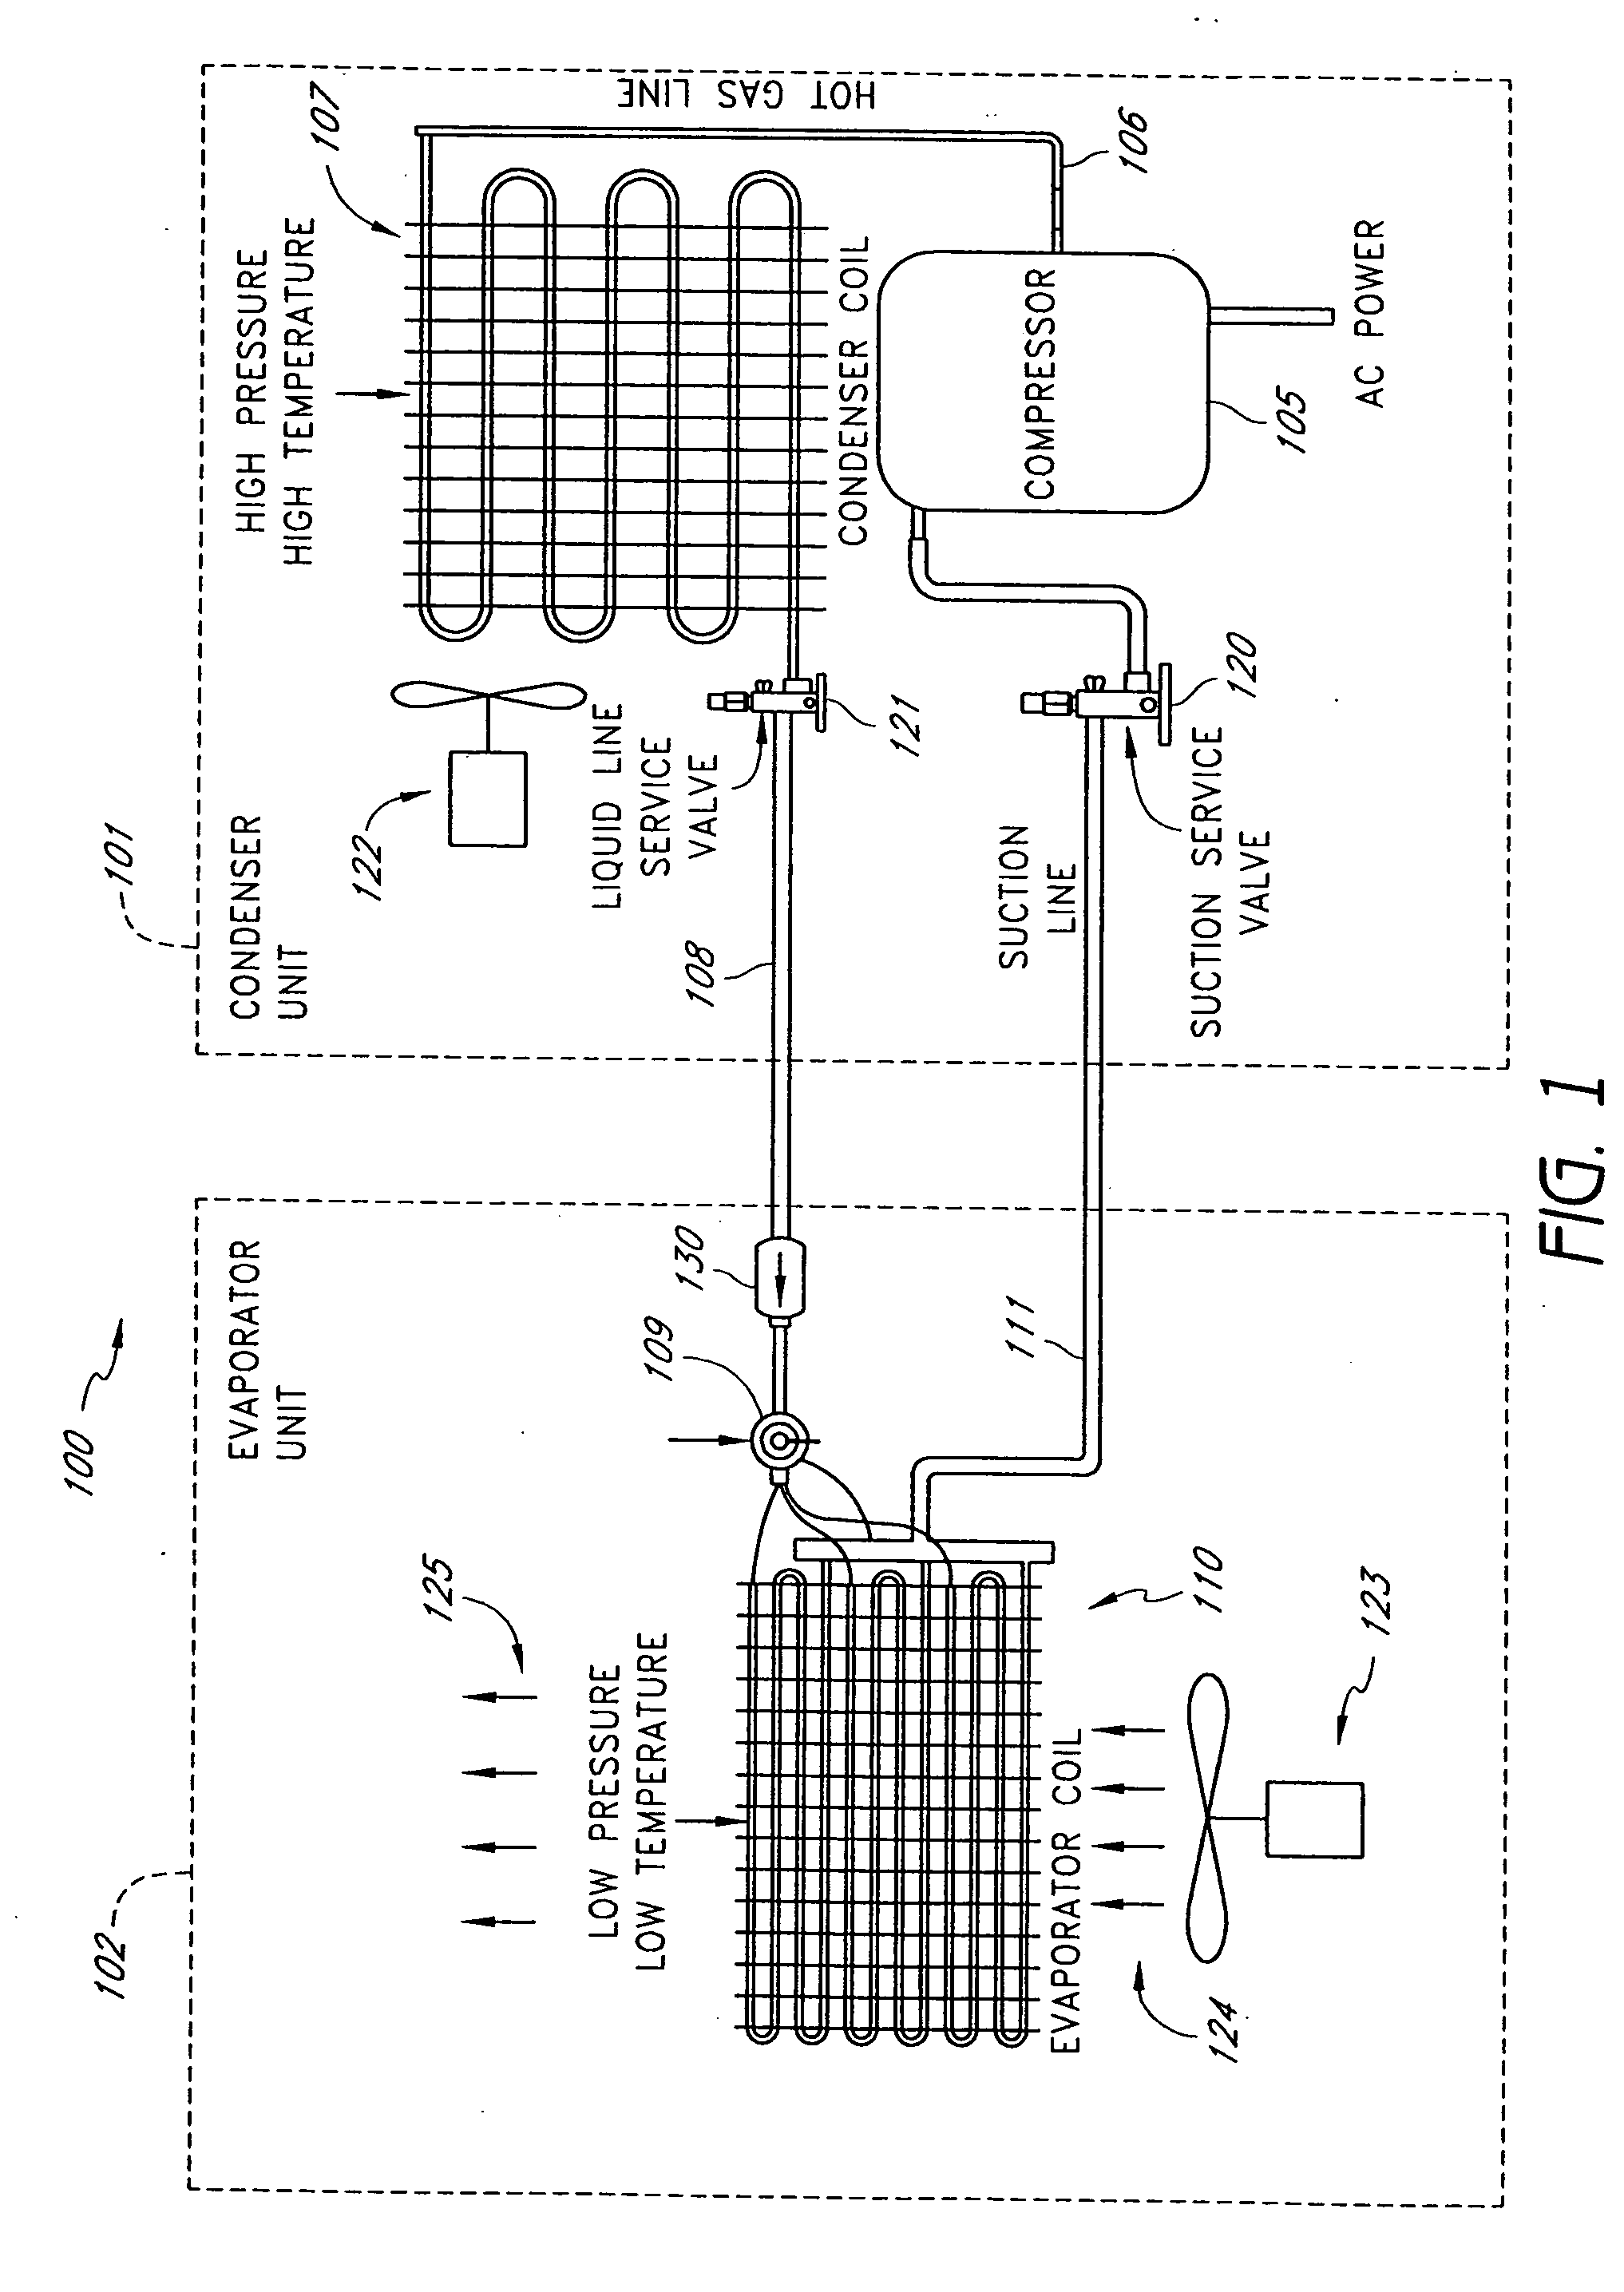 Method and apparatus for monitoring a calibrated condenser unit in a refrigerant-cycle system